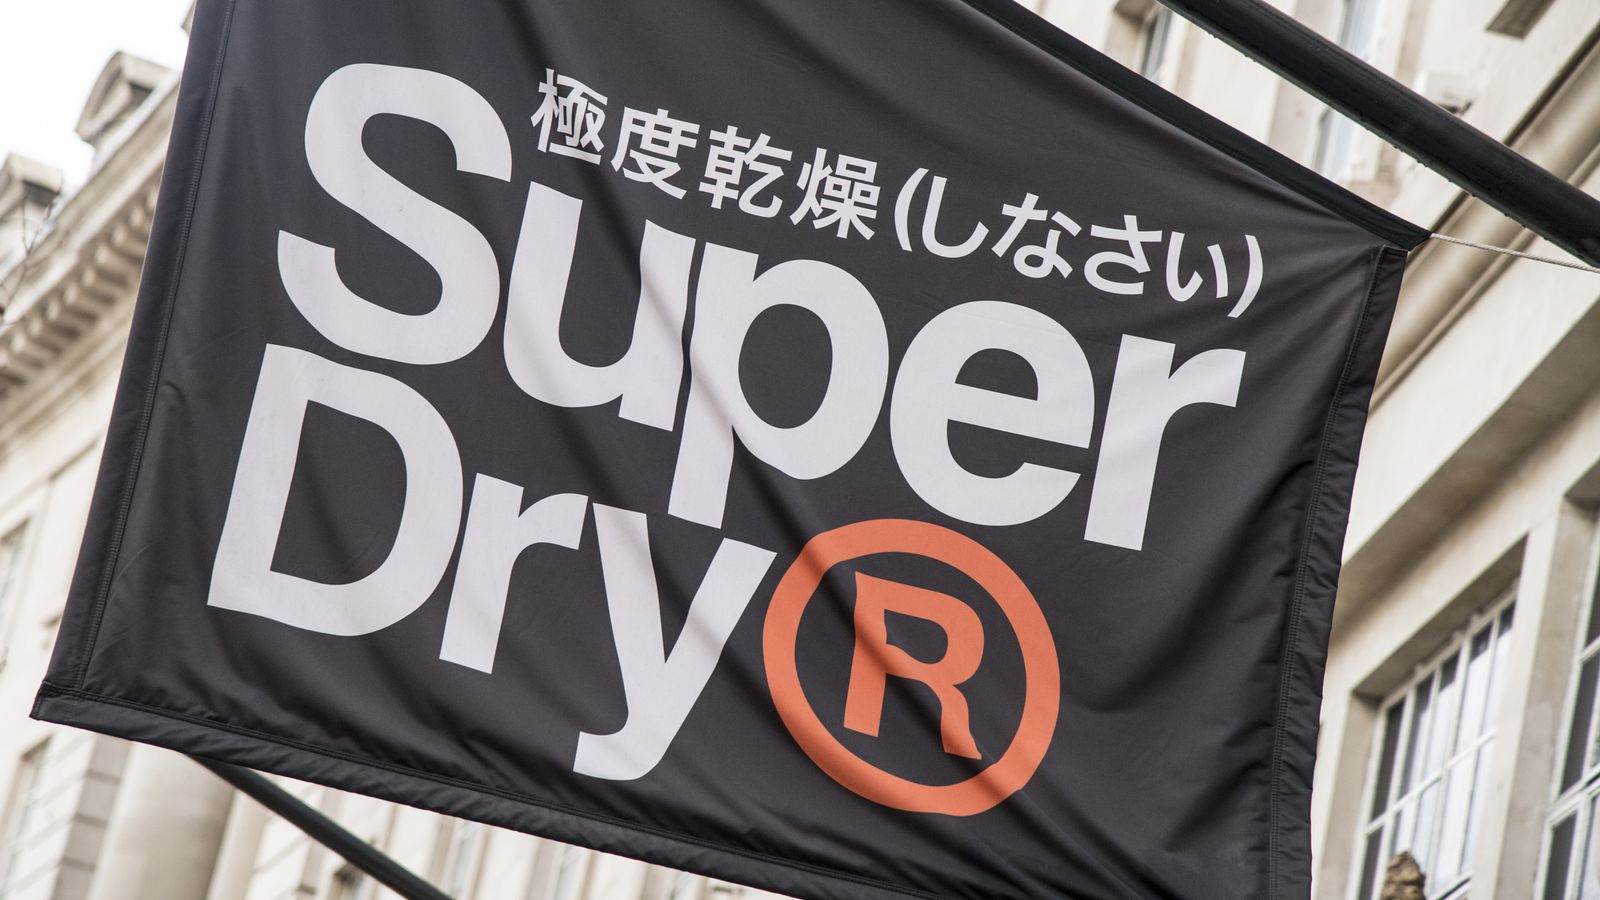 Struggling Superdry in talks to tap Hilco for new £10m loan